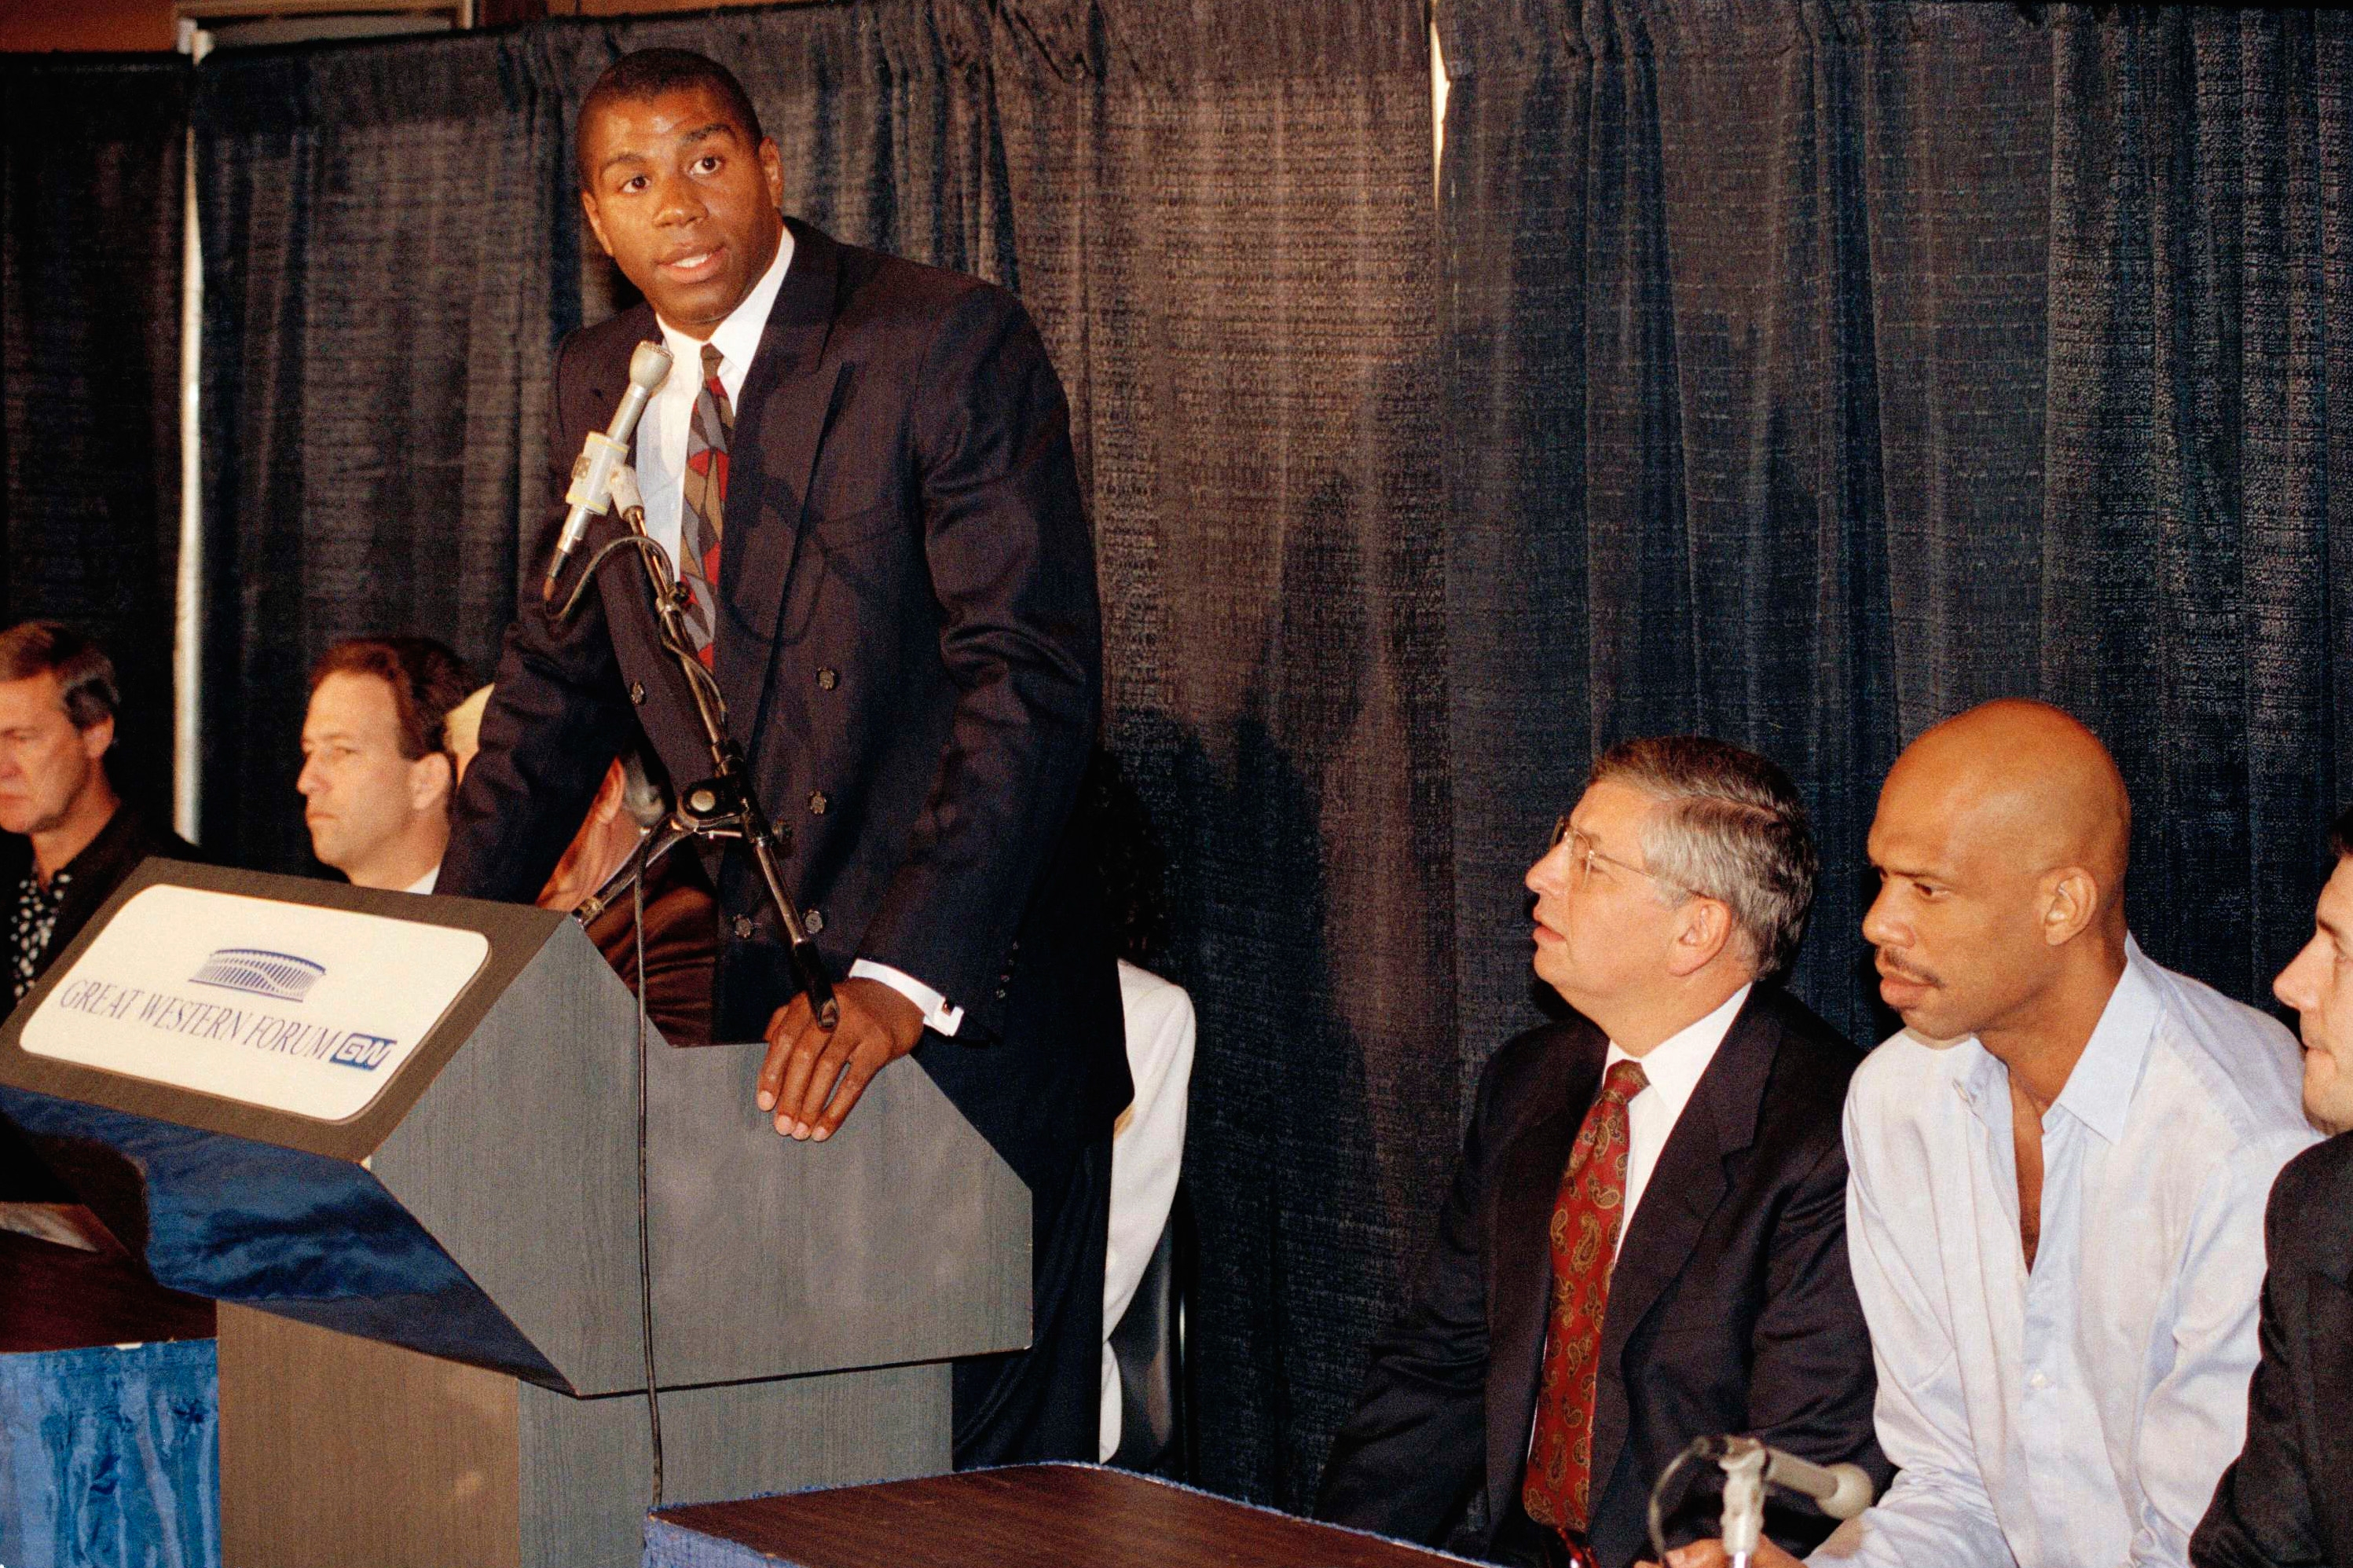 Then-NBA Commissioner David Stern stood by then-NBA star Earvin "Magic" Johnson when he announced he was HIV positive in 1991. Stern died Wednesday. (Mark J. Terrill–AP)